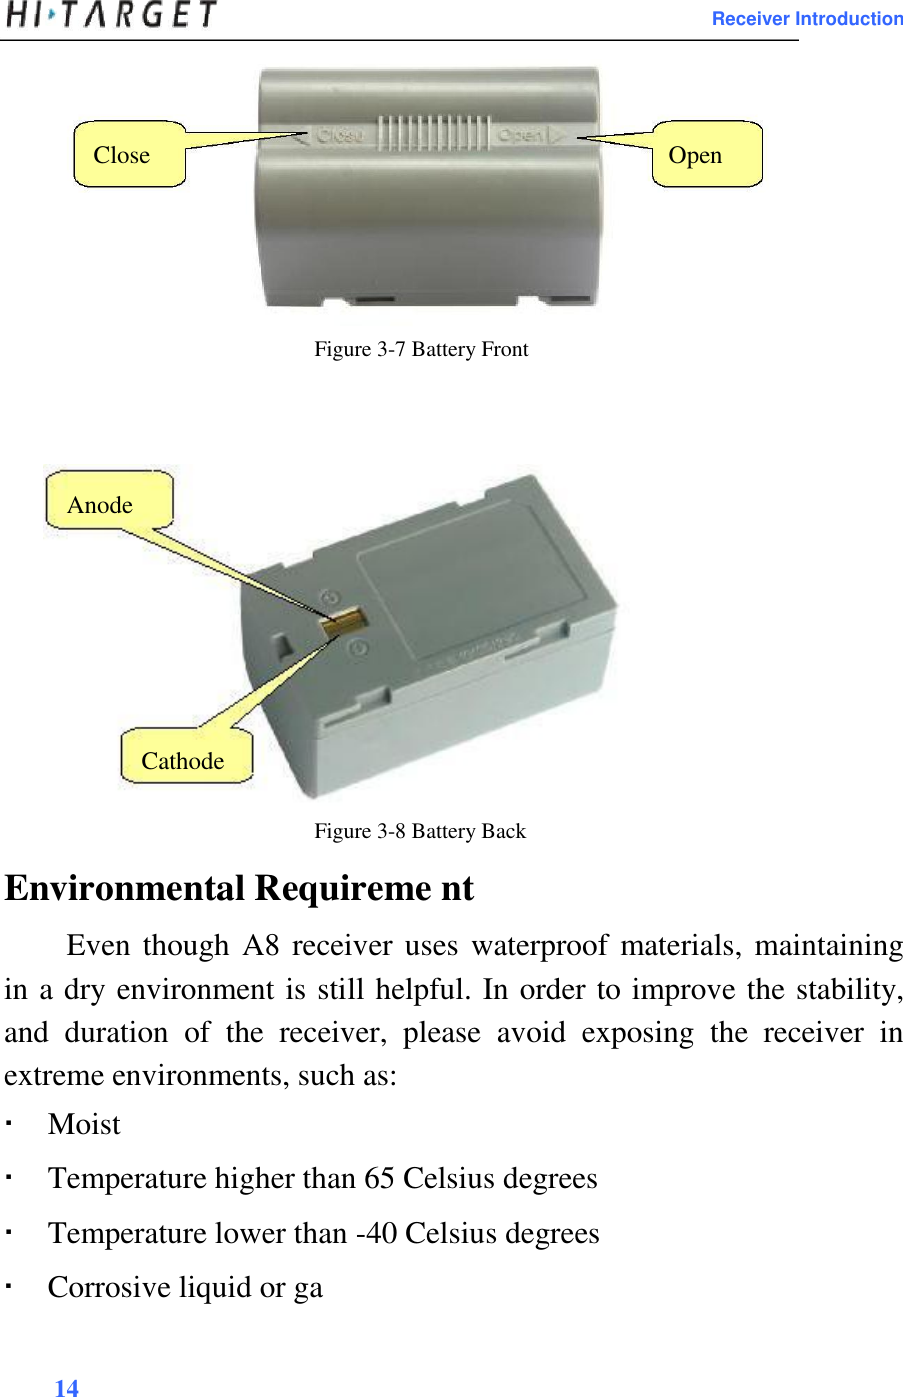 Receiver Introduction      Close Open         Figure 3-7 Battery Front       Anode           Cathode   Figure 3-8 Battery Back  Environmental Requireme nt  Even though A8 receiver uses waterproof materials, maintaining in a dry environment is still helpful. In order to improve the stability, and  duration  of  the  receiver,  please  avoid  exposing  the  receiver  in extreme environments, such as:   Moist Temperature higher than 65 Celsius degrees Temperature lower than -40 Celsius degrees Corrosive liquid or ga14 